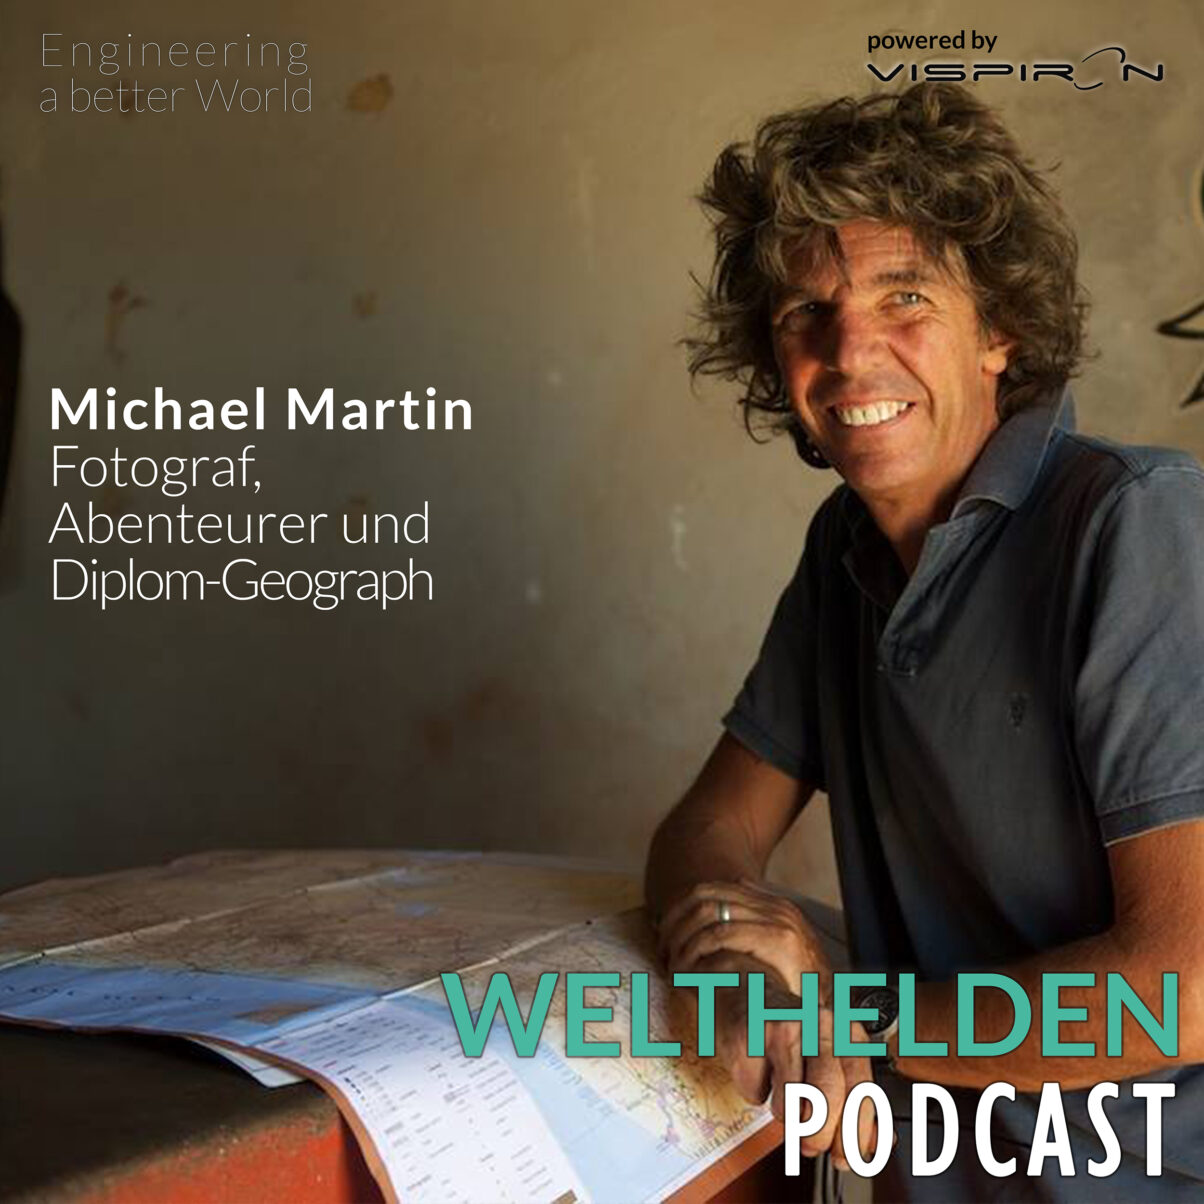 Welthelden_Podcast_VISPIRON_SYSTEMS_Michael_Martin